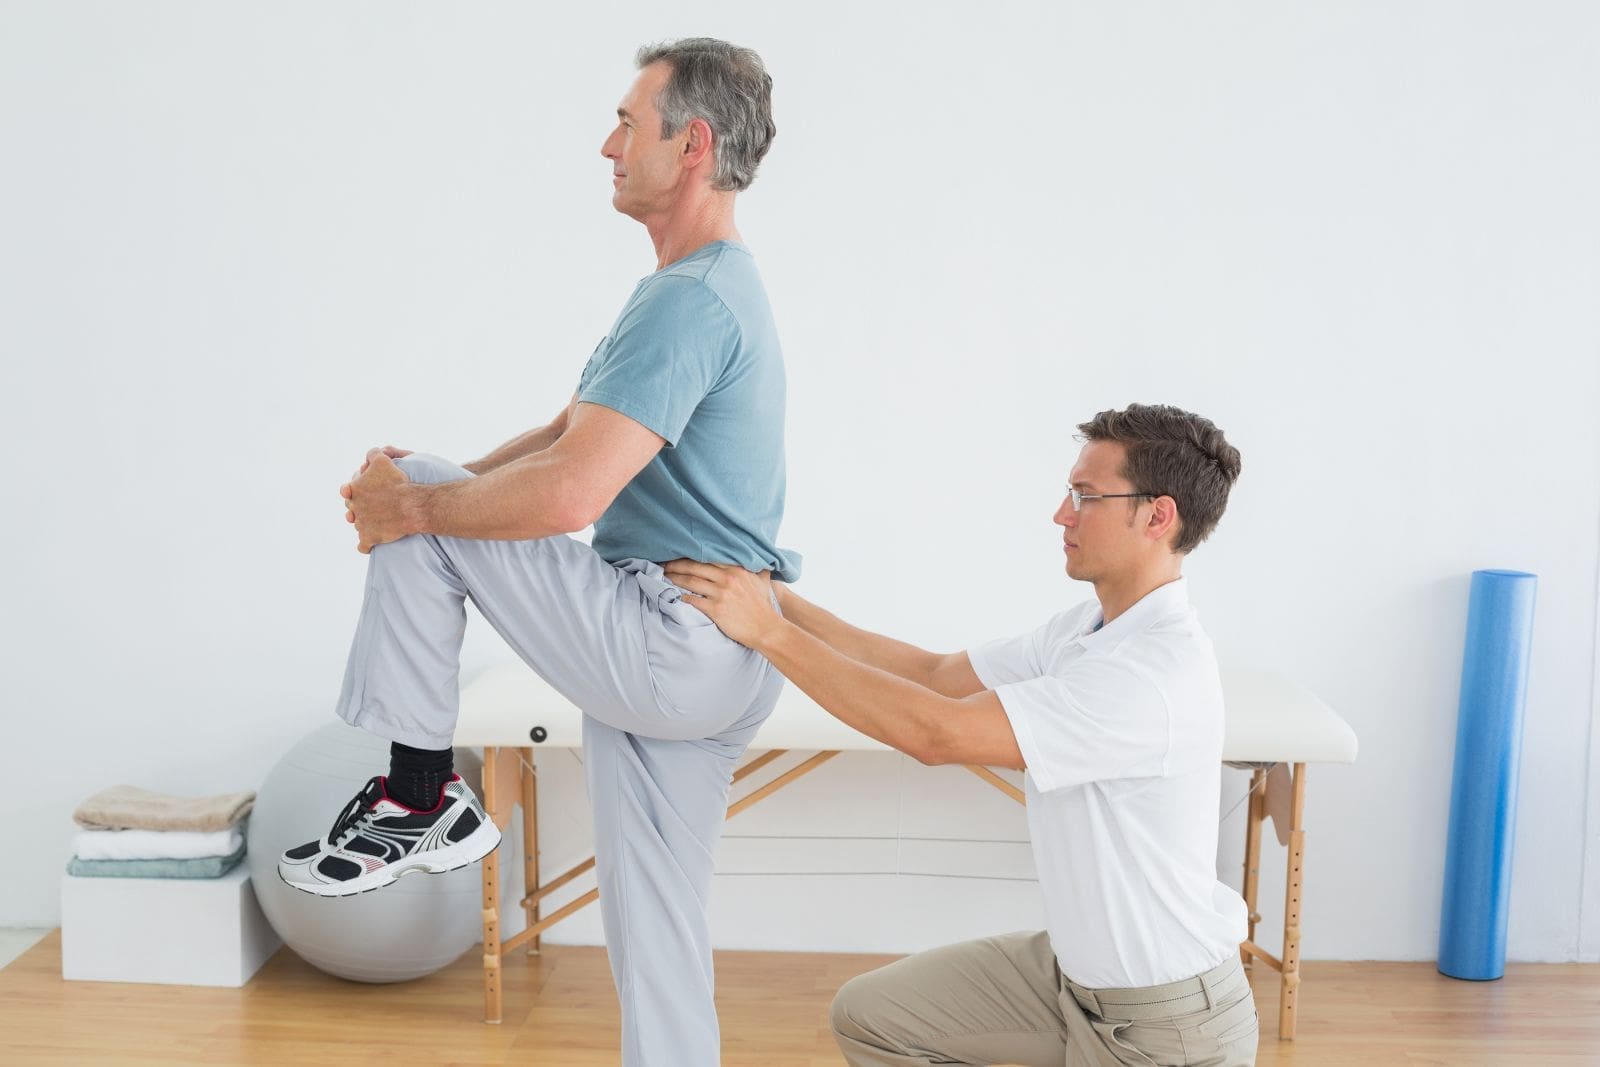 Physical Therapeutics For Herniated Discs | El Paso Chiropractor